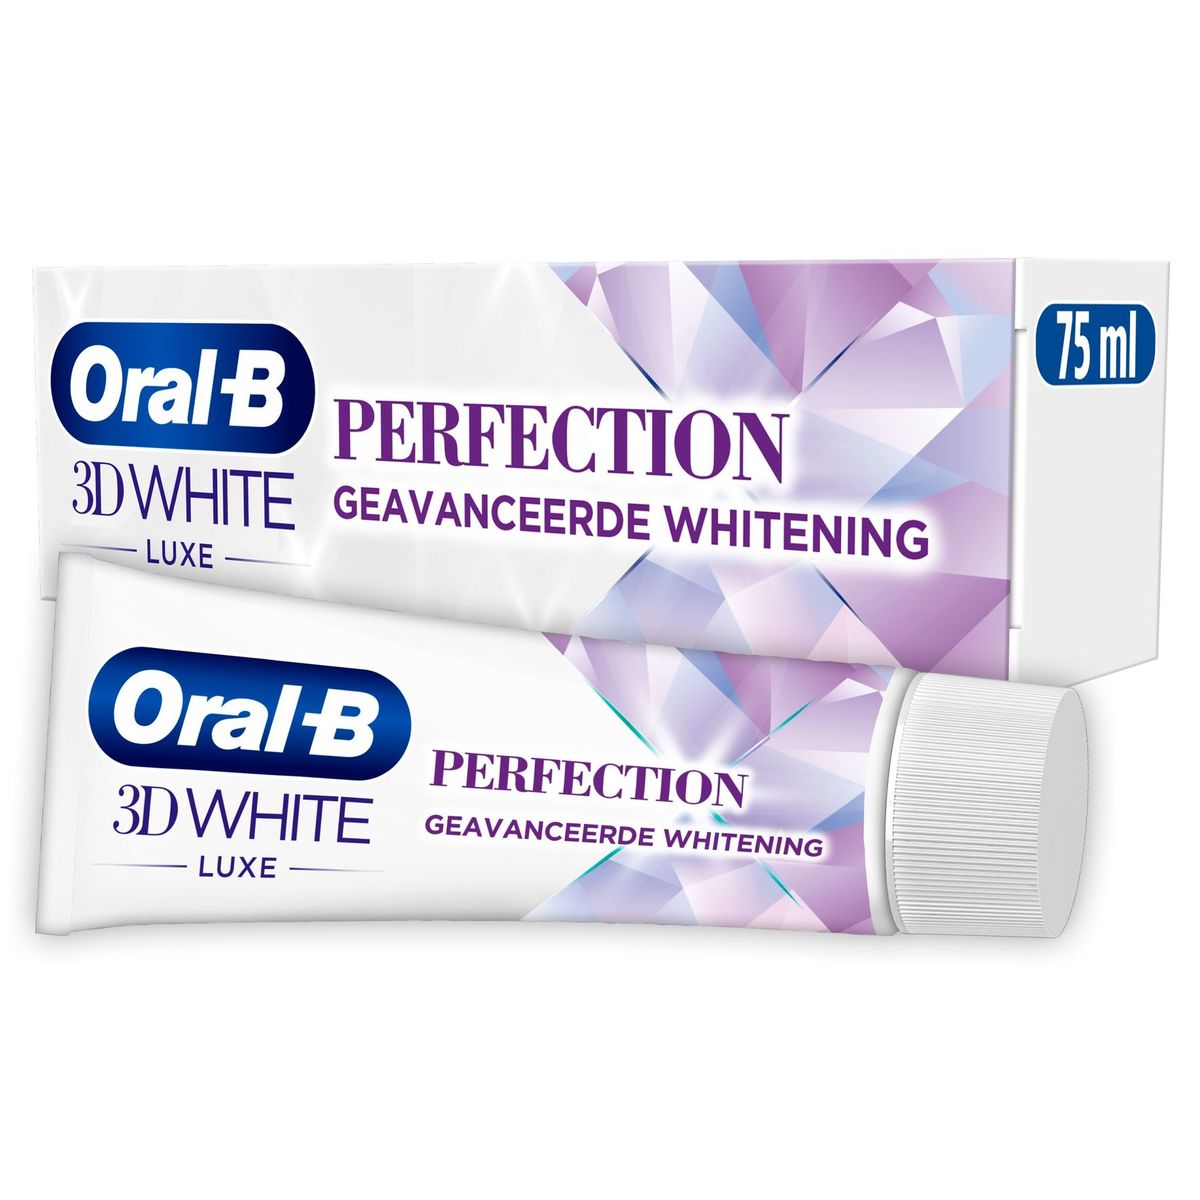 Dentifrice Oral-B 3DWhite Luxe Perfection 75 ml